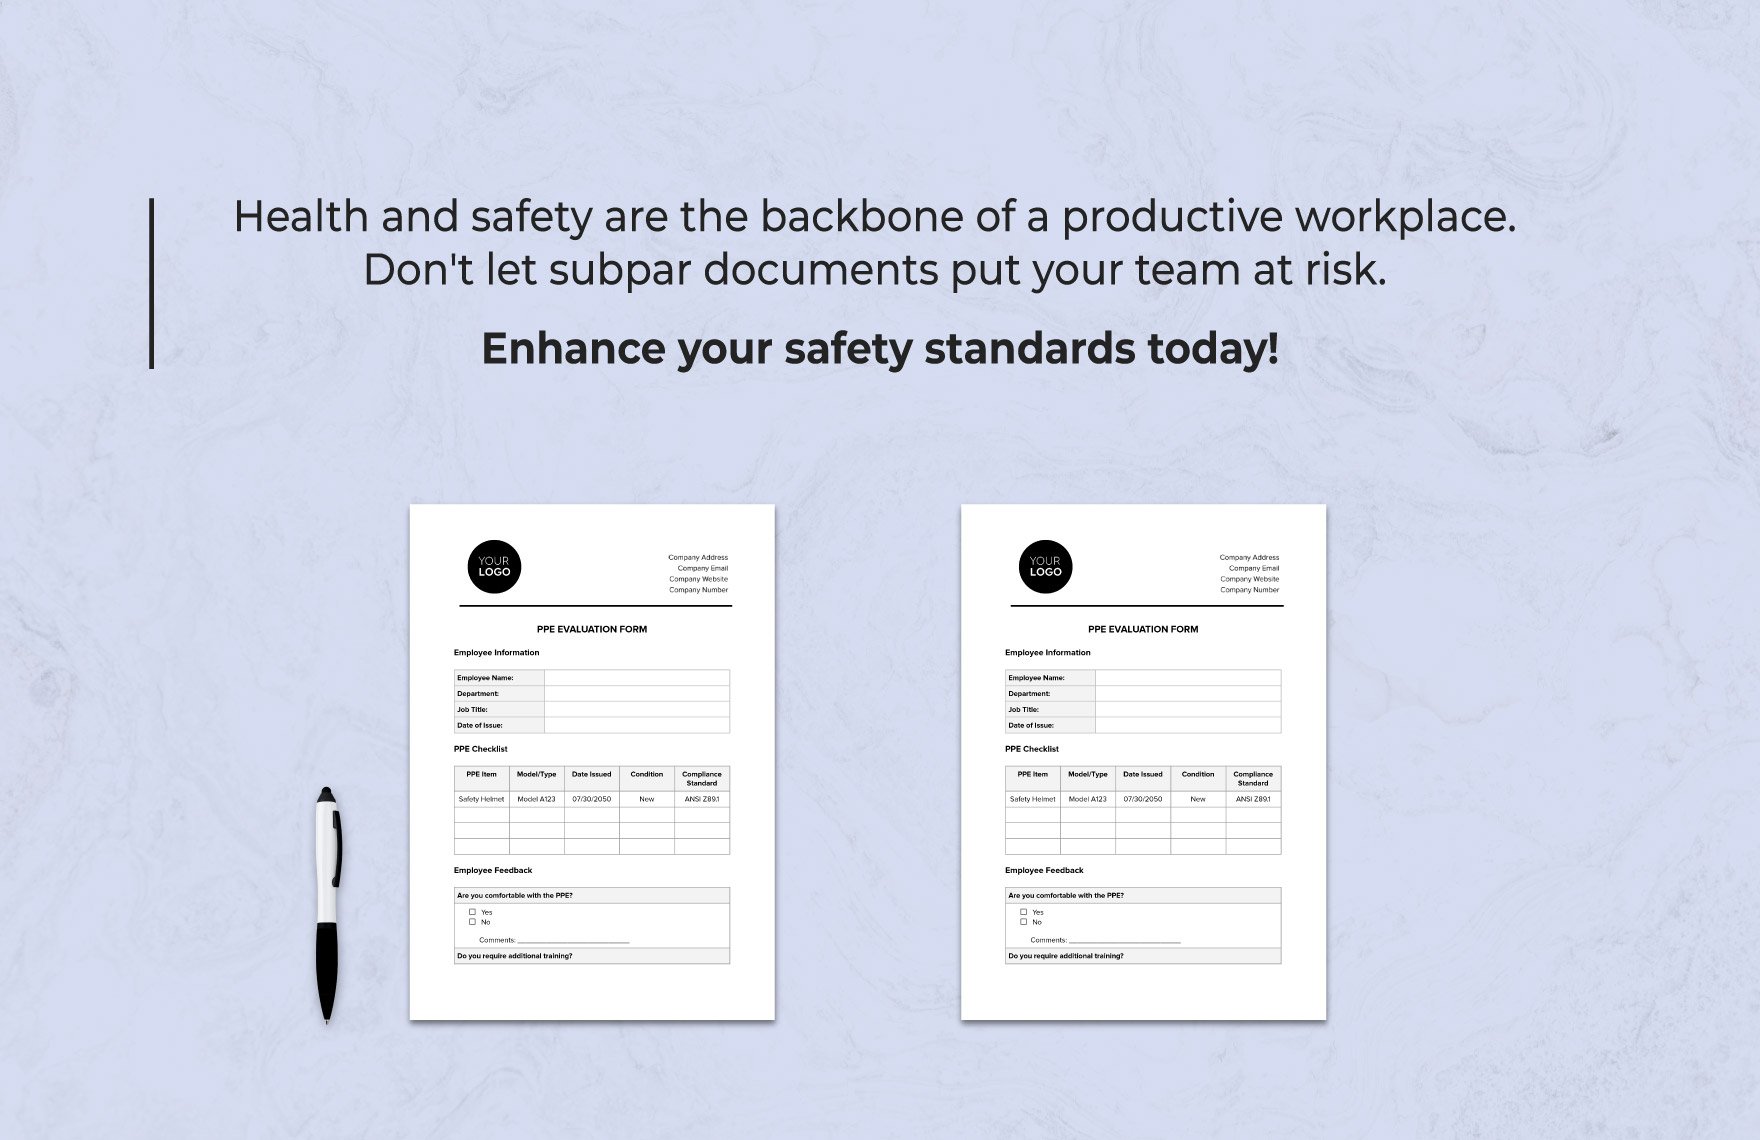 PPE Evaluation Form Template